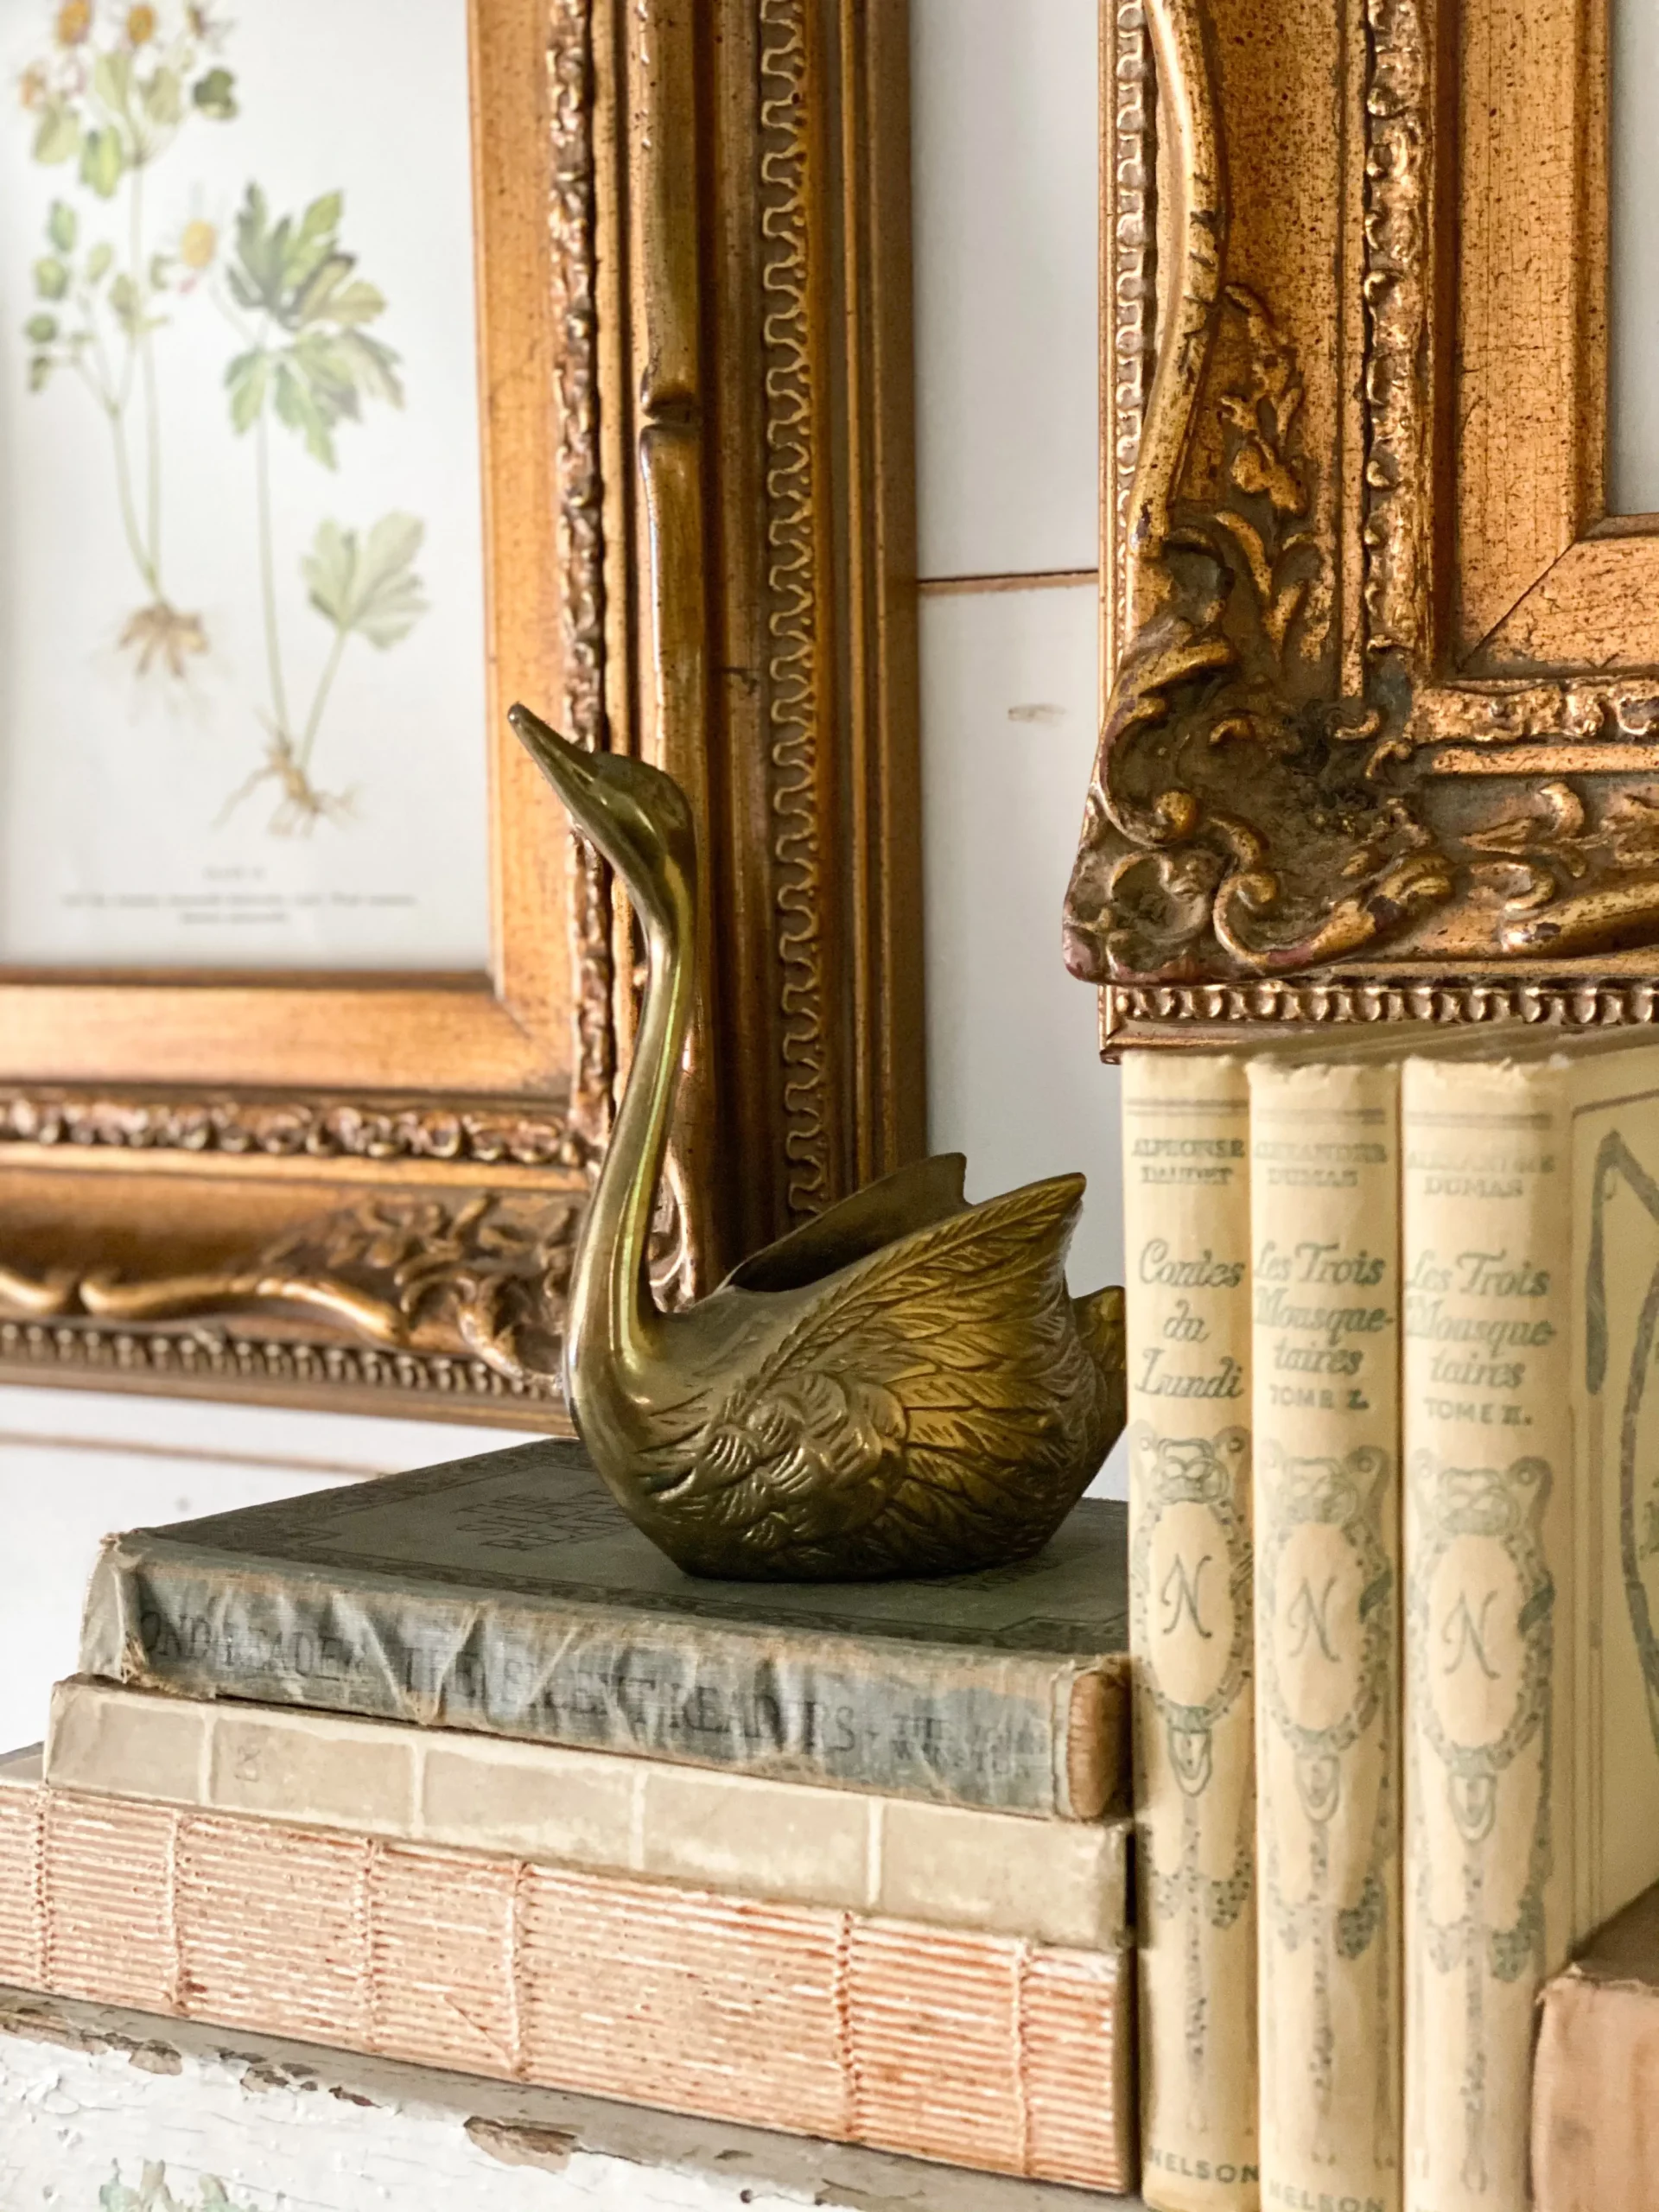 beautiful vintage books stacked on a mantel with a small brass goose on top